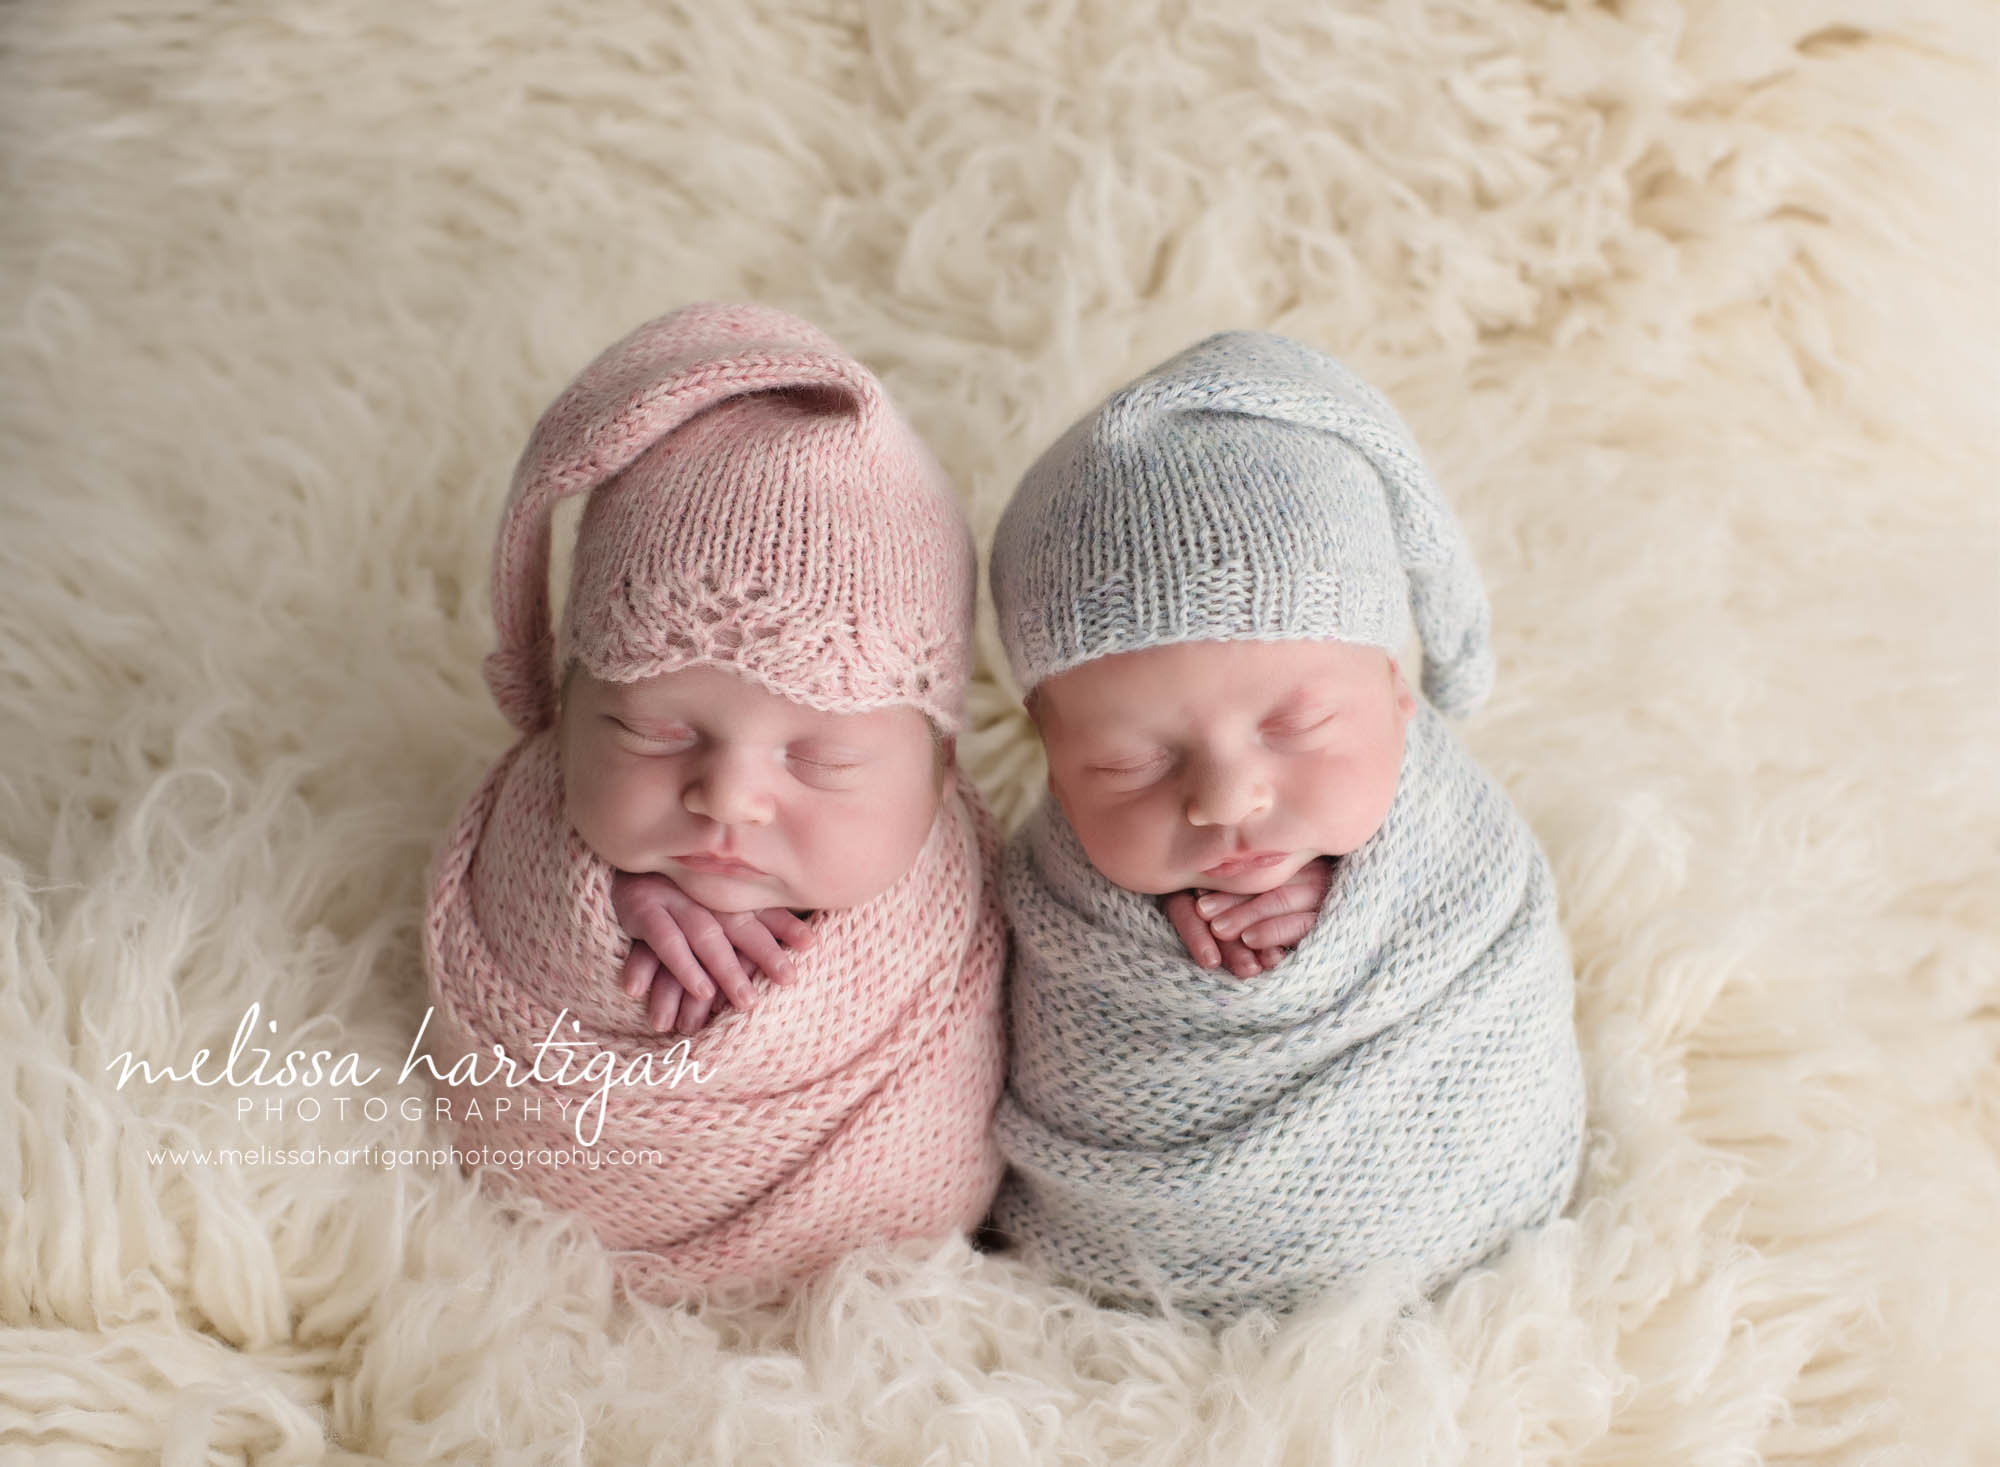 Melissa Hartigan Photography Connecticut Newborn Twin Photographer Coventry Ct Middlefield CT baby Fairfield county Newborn and maternity CT photographer Newborn twin photographer baby twins wearing pink and blue knit hats and wraps on white flokati